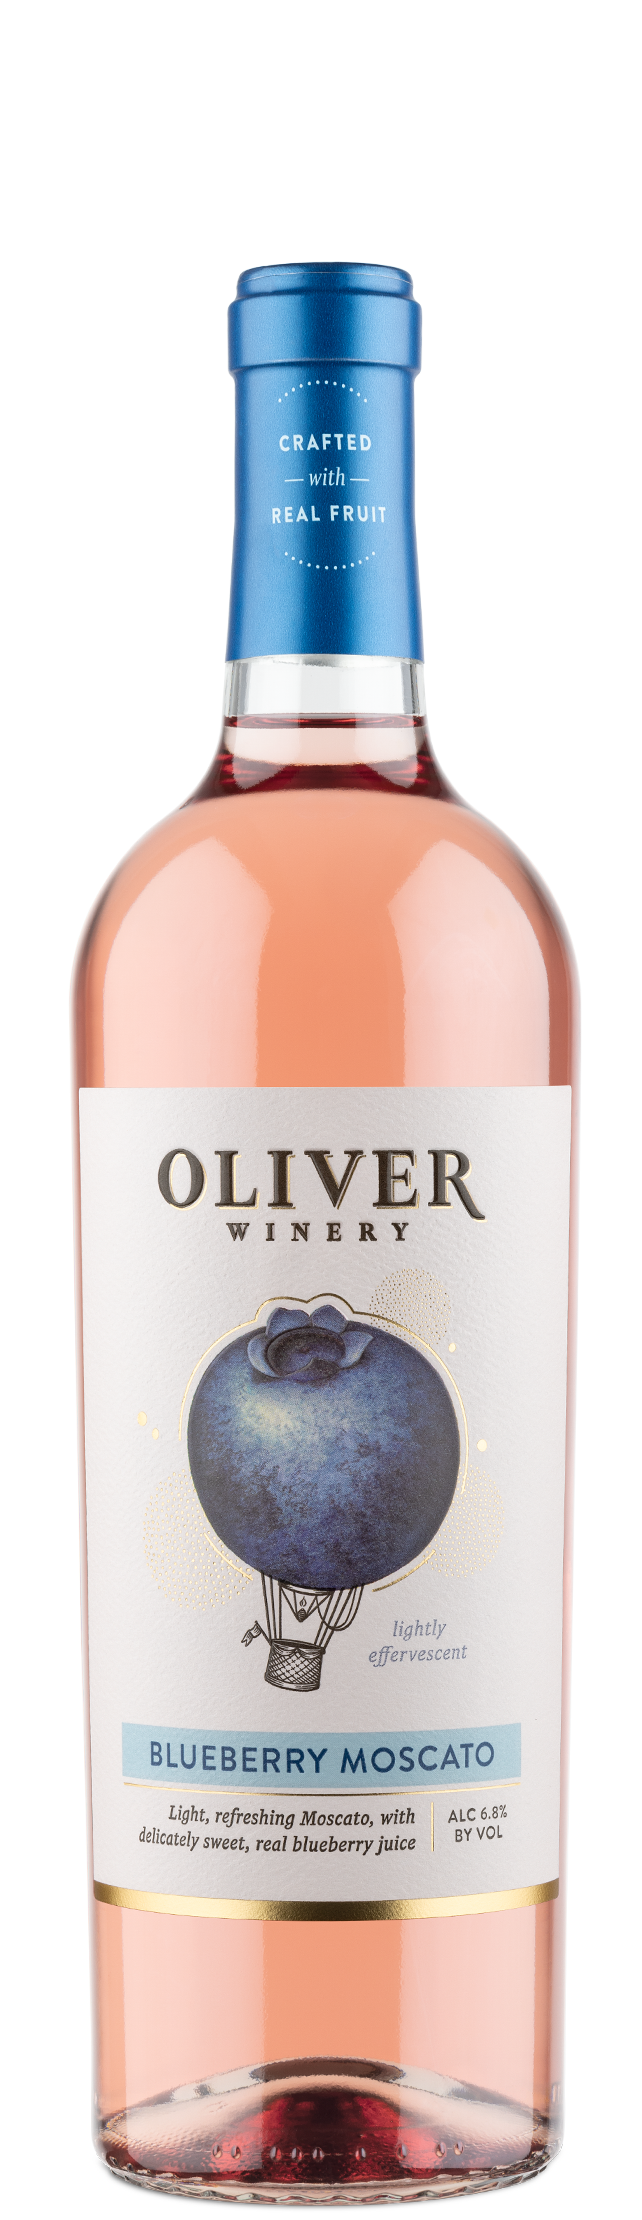 Oliver Winery Vine Series Blueberry Moscato Wine